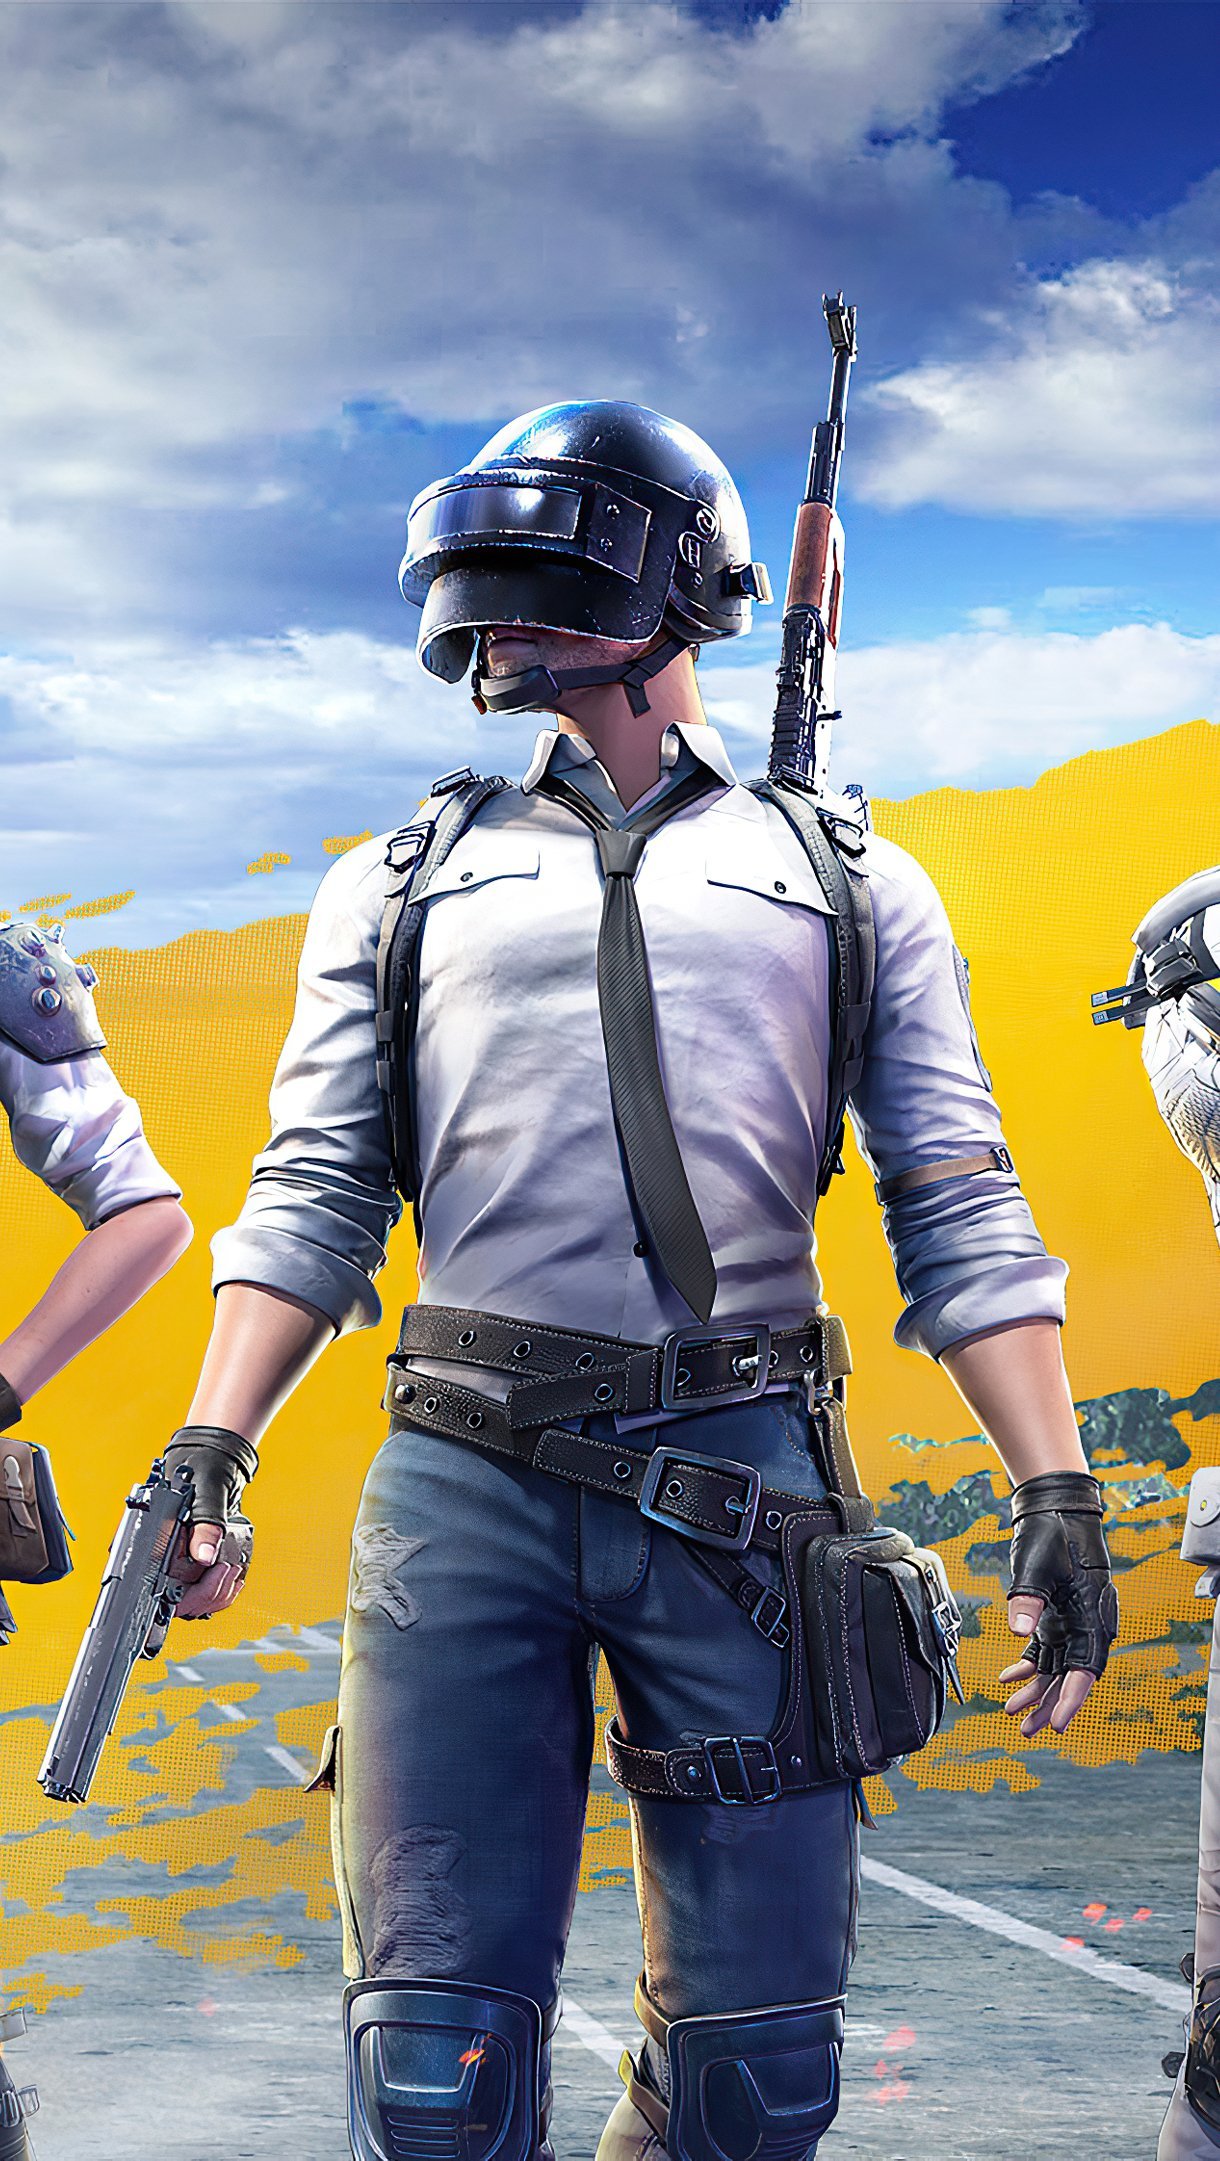 Pubg Royale 2020 4k Wallpaper for iphone and 4K Gaming wallpapers for  laptop download now for …